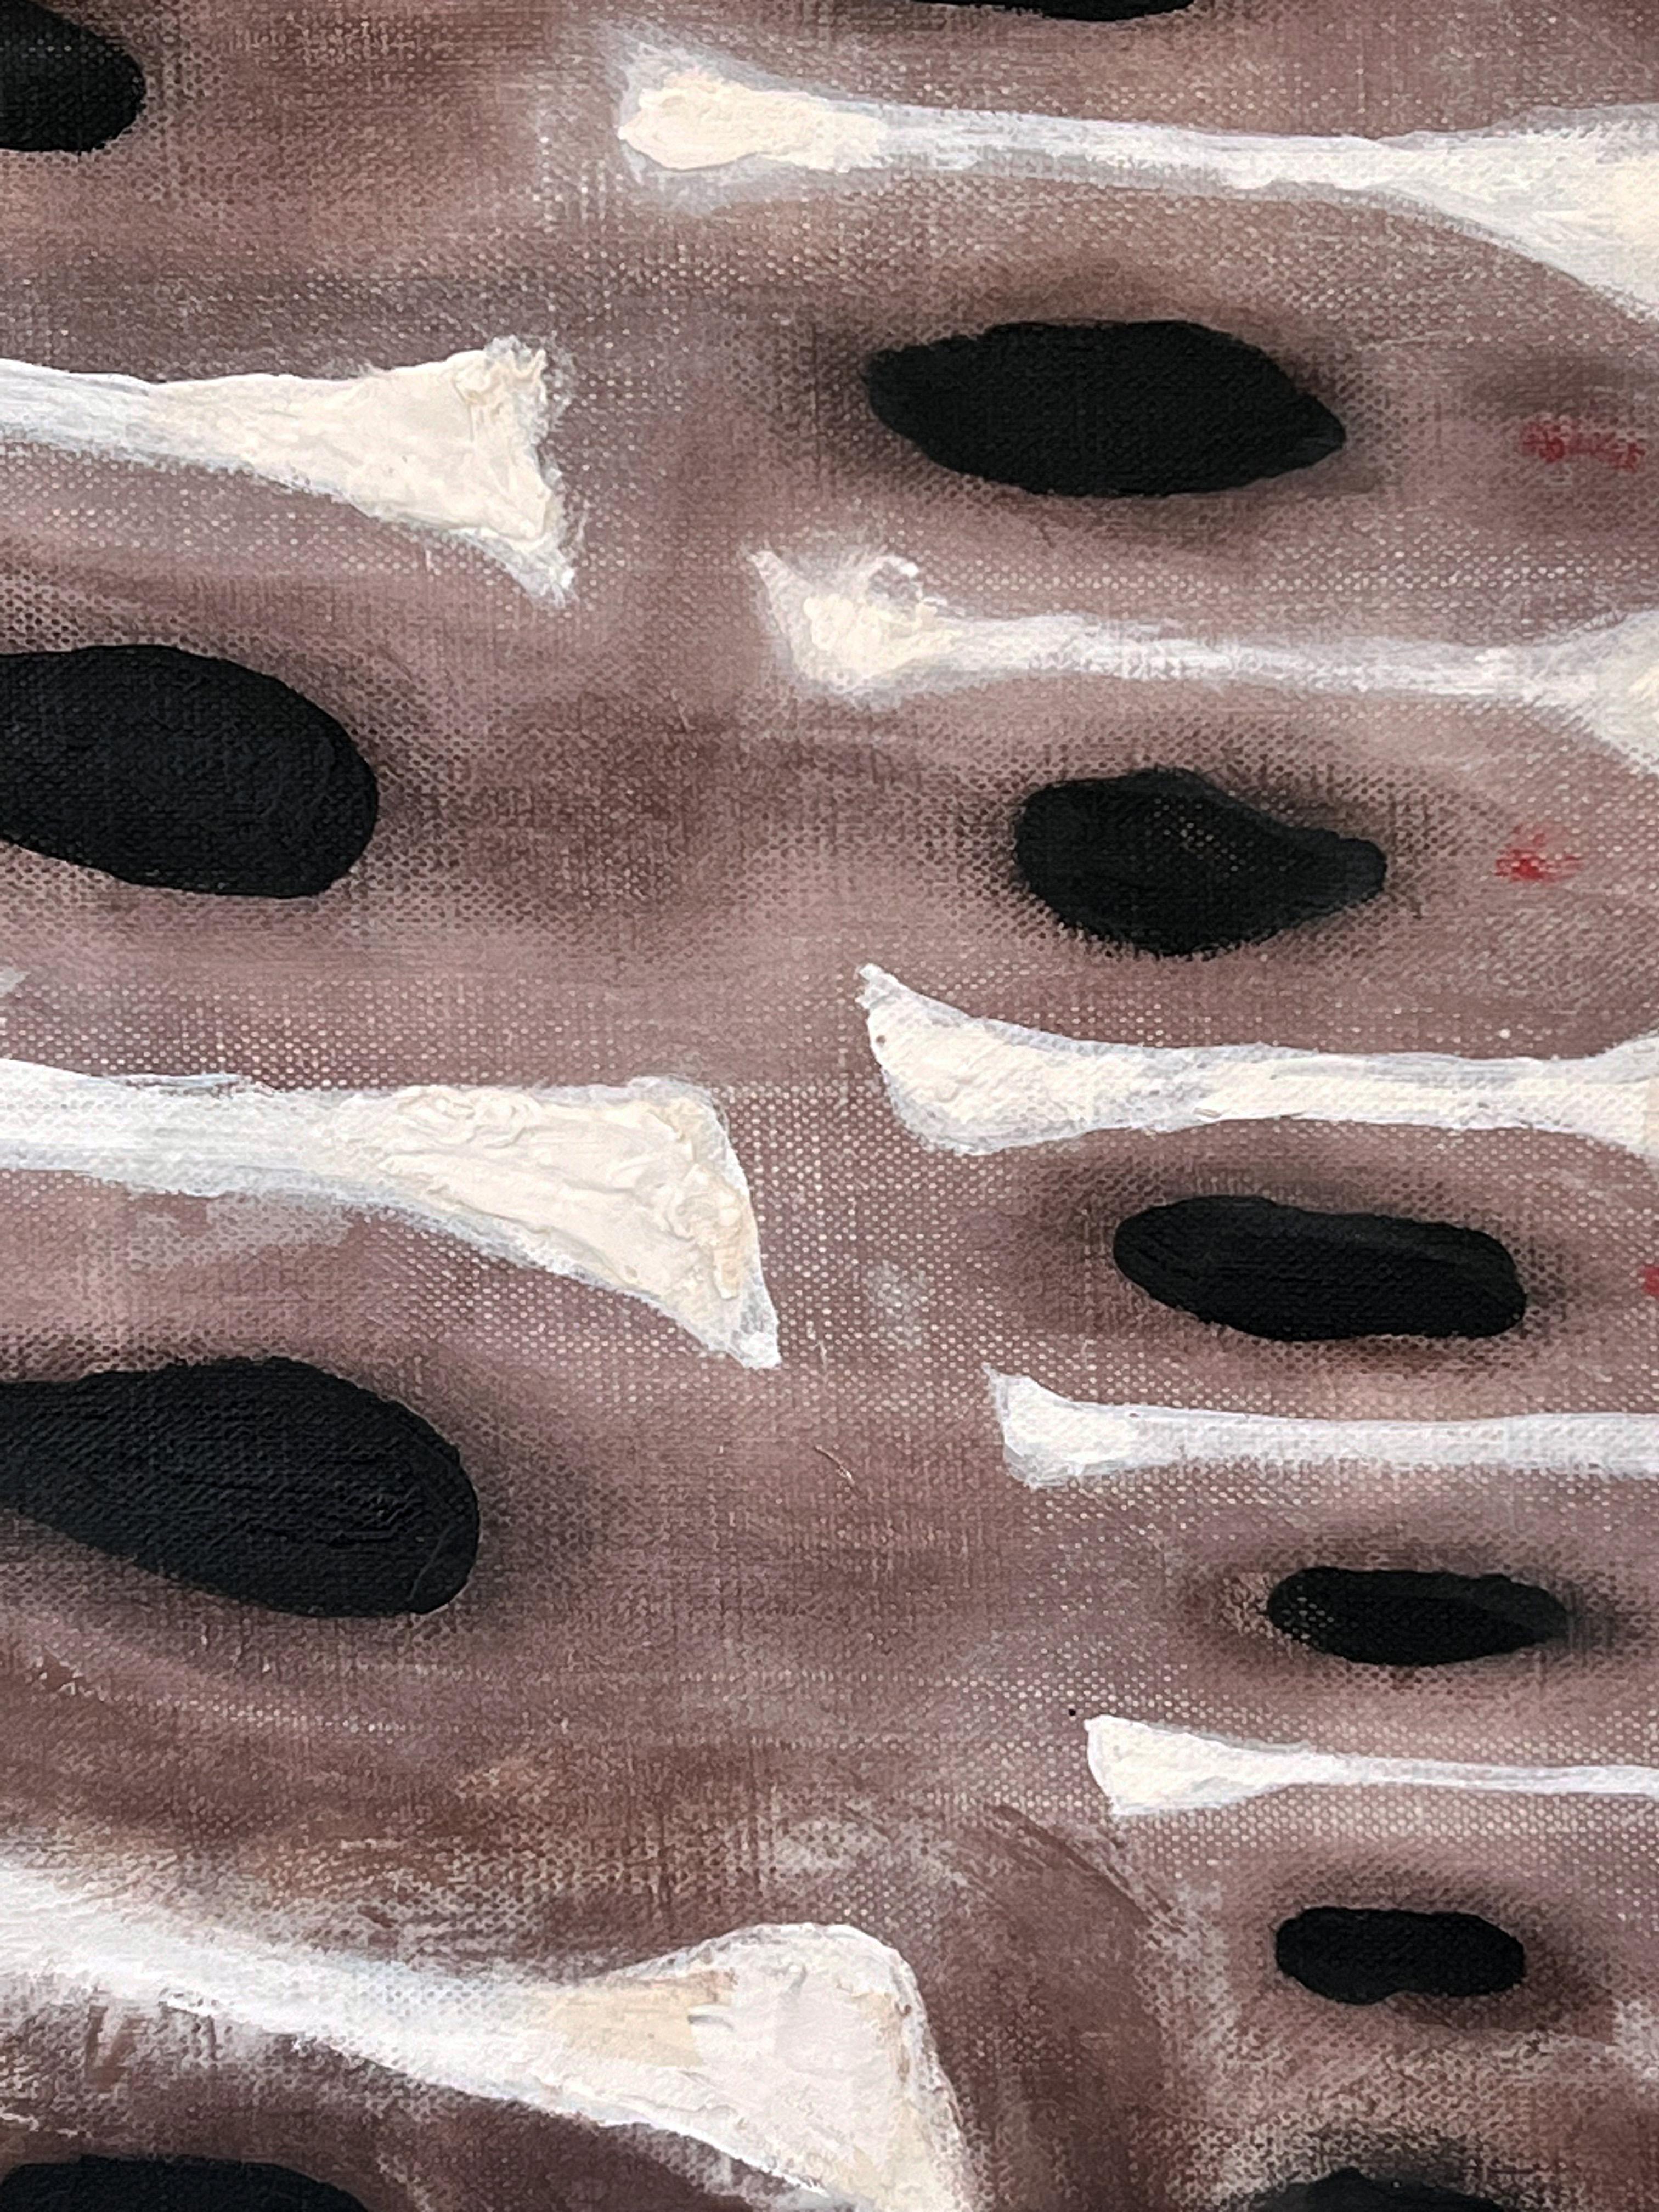 PLATO'S CAVE
2024, Paris, France

A bold and graphic black & white painting with primitive undertones. Black and white acrylic paint lay over a purple-brown wash forming shapes. Very subtle, small, red circular shapes are painted to the side of